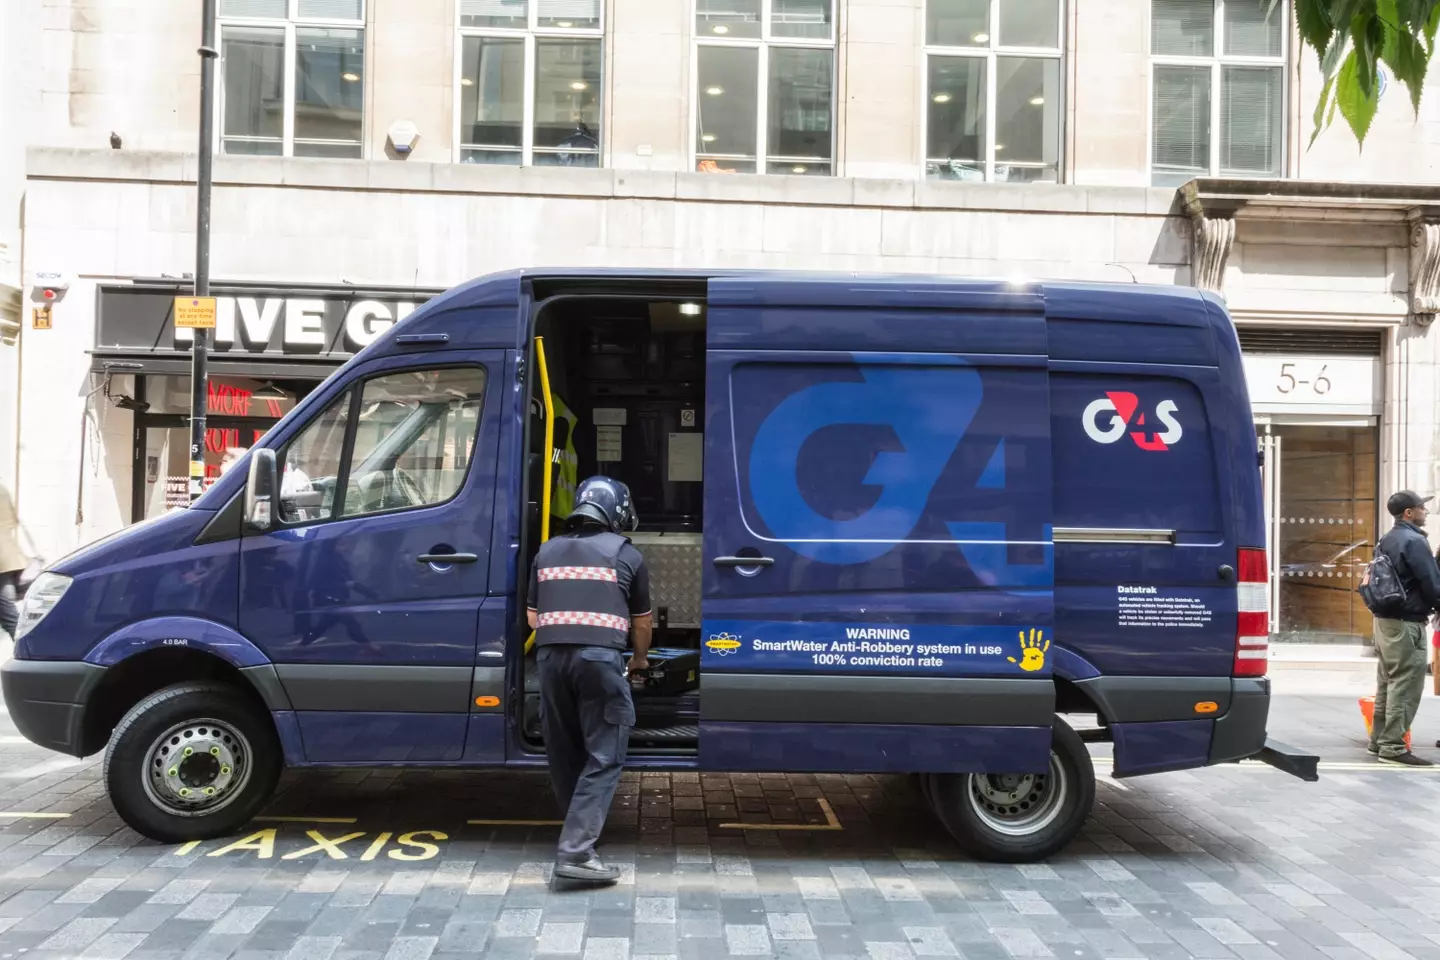 A bank robber posing as a G4S security guard walked away with £150k in cash.